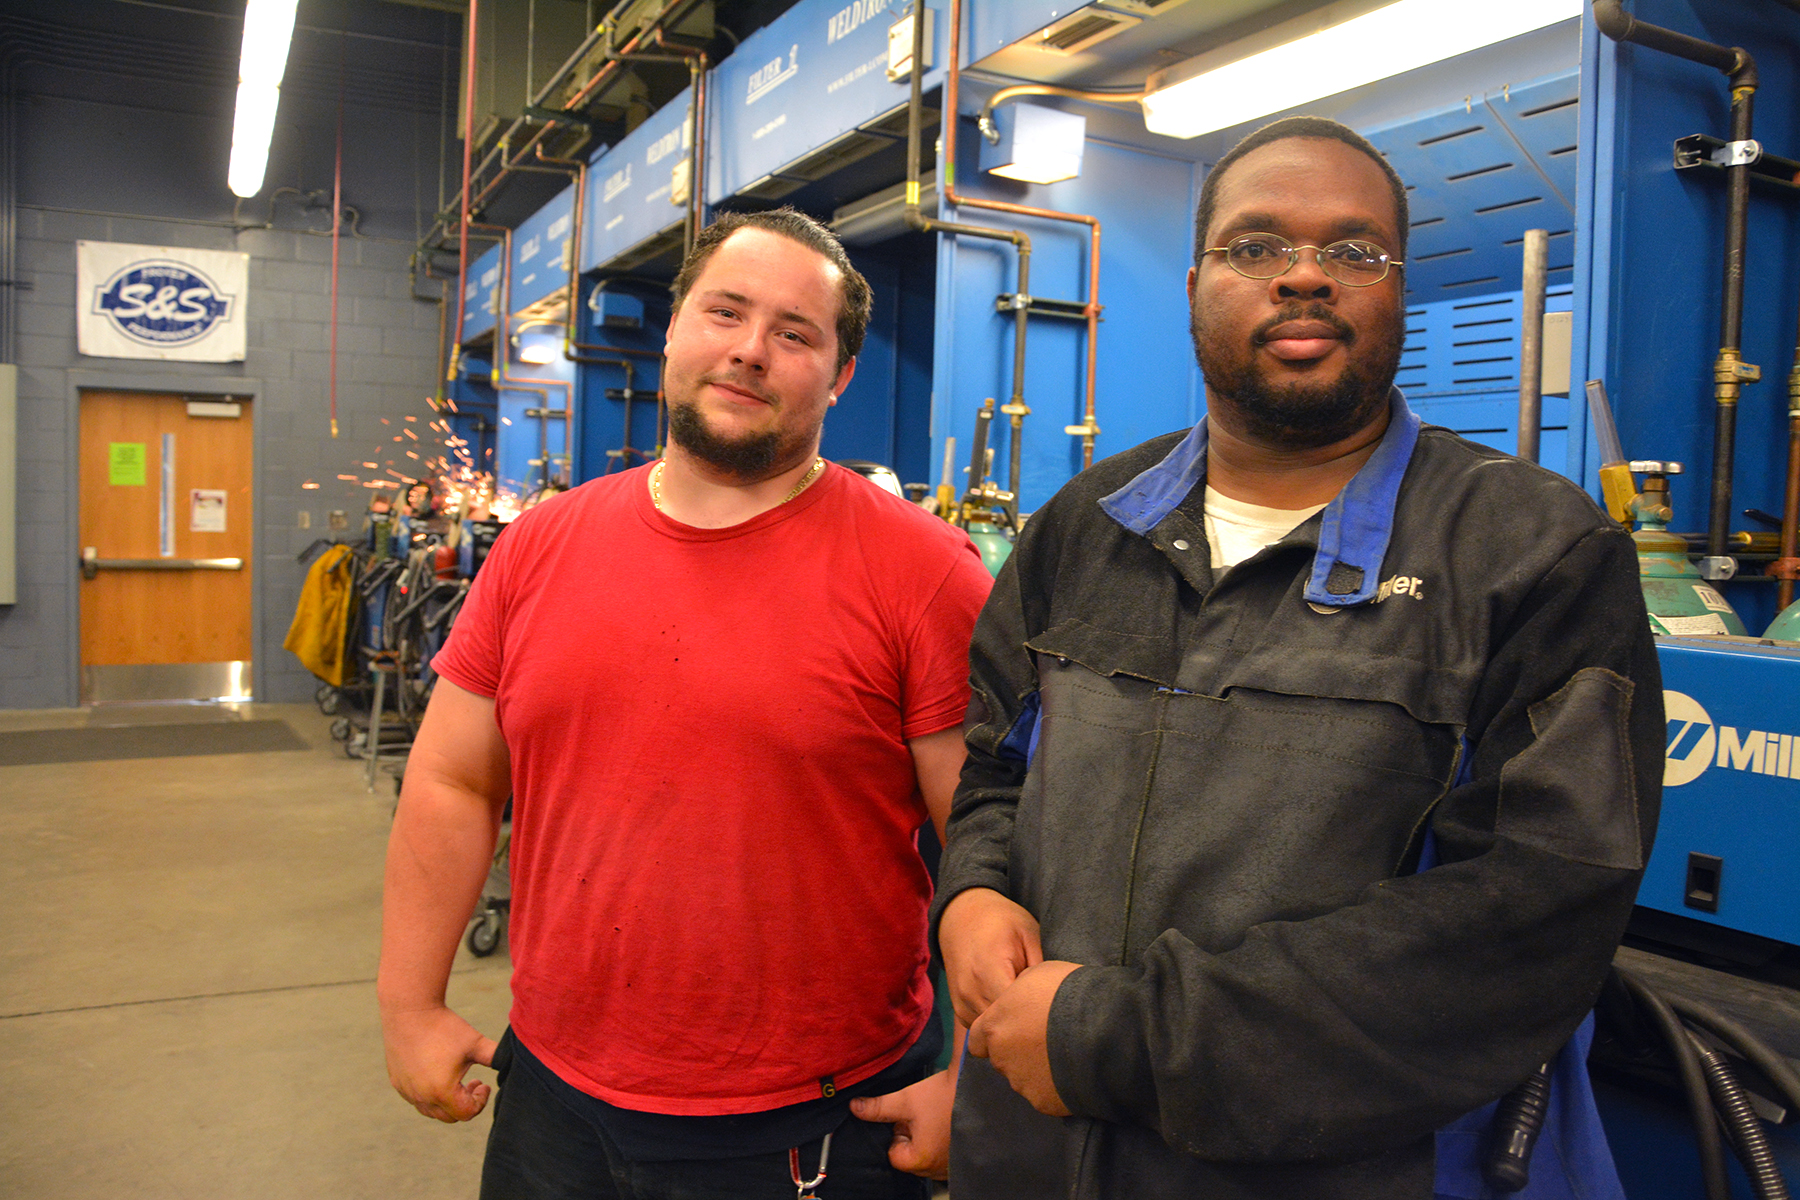 Pictured are Richmond Community College welding students Chance Askew, left, and James McDonald, who competed in the American Welding Society’s annual regional welding competition.